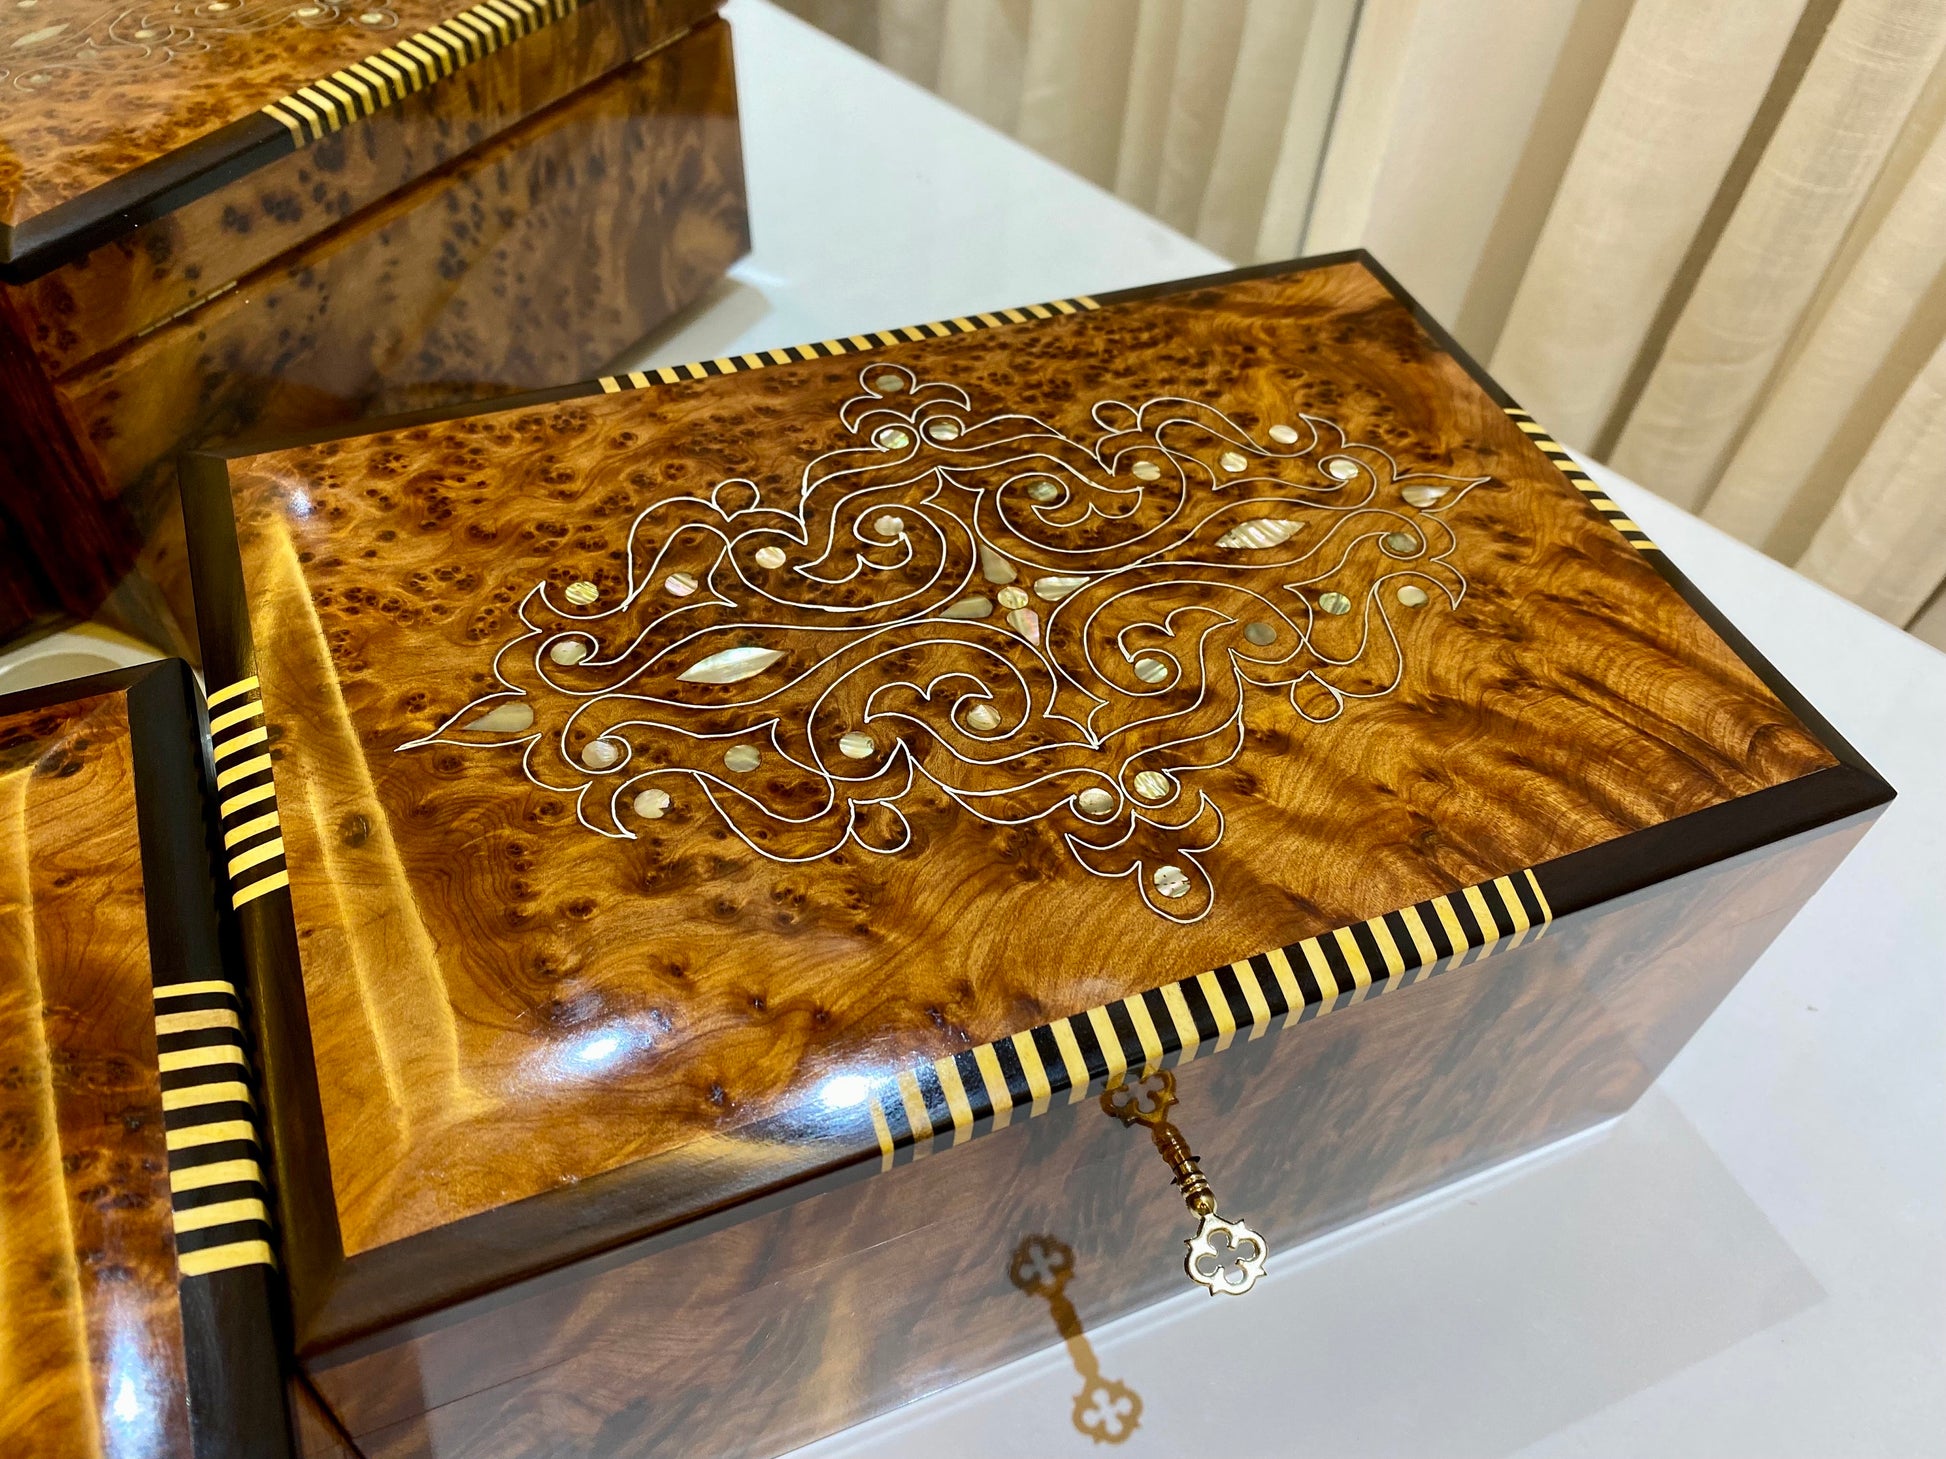 Set of 2 Handcrafted Moroccan jewelry Box,wood engraved with mother of pearls,lemon wood,brass inlay,lockable thuya wooden Box with key